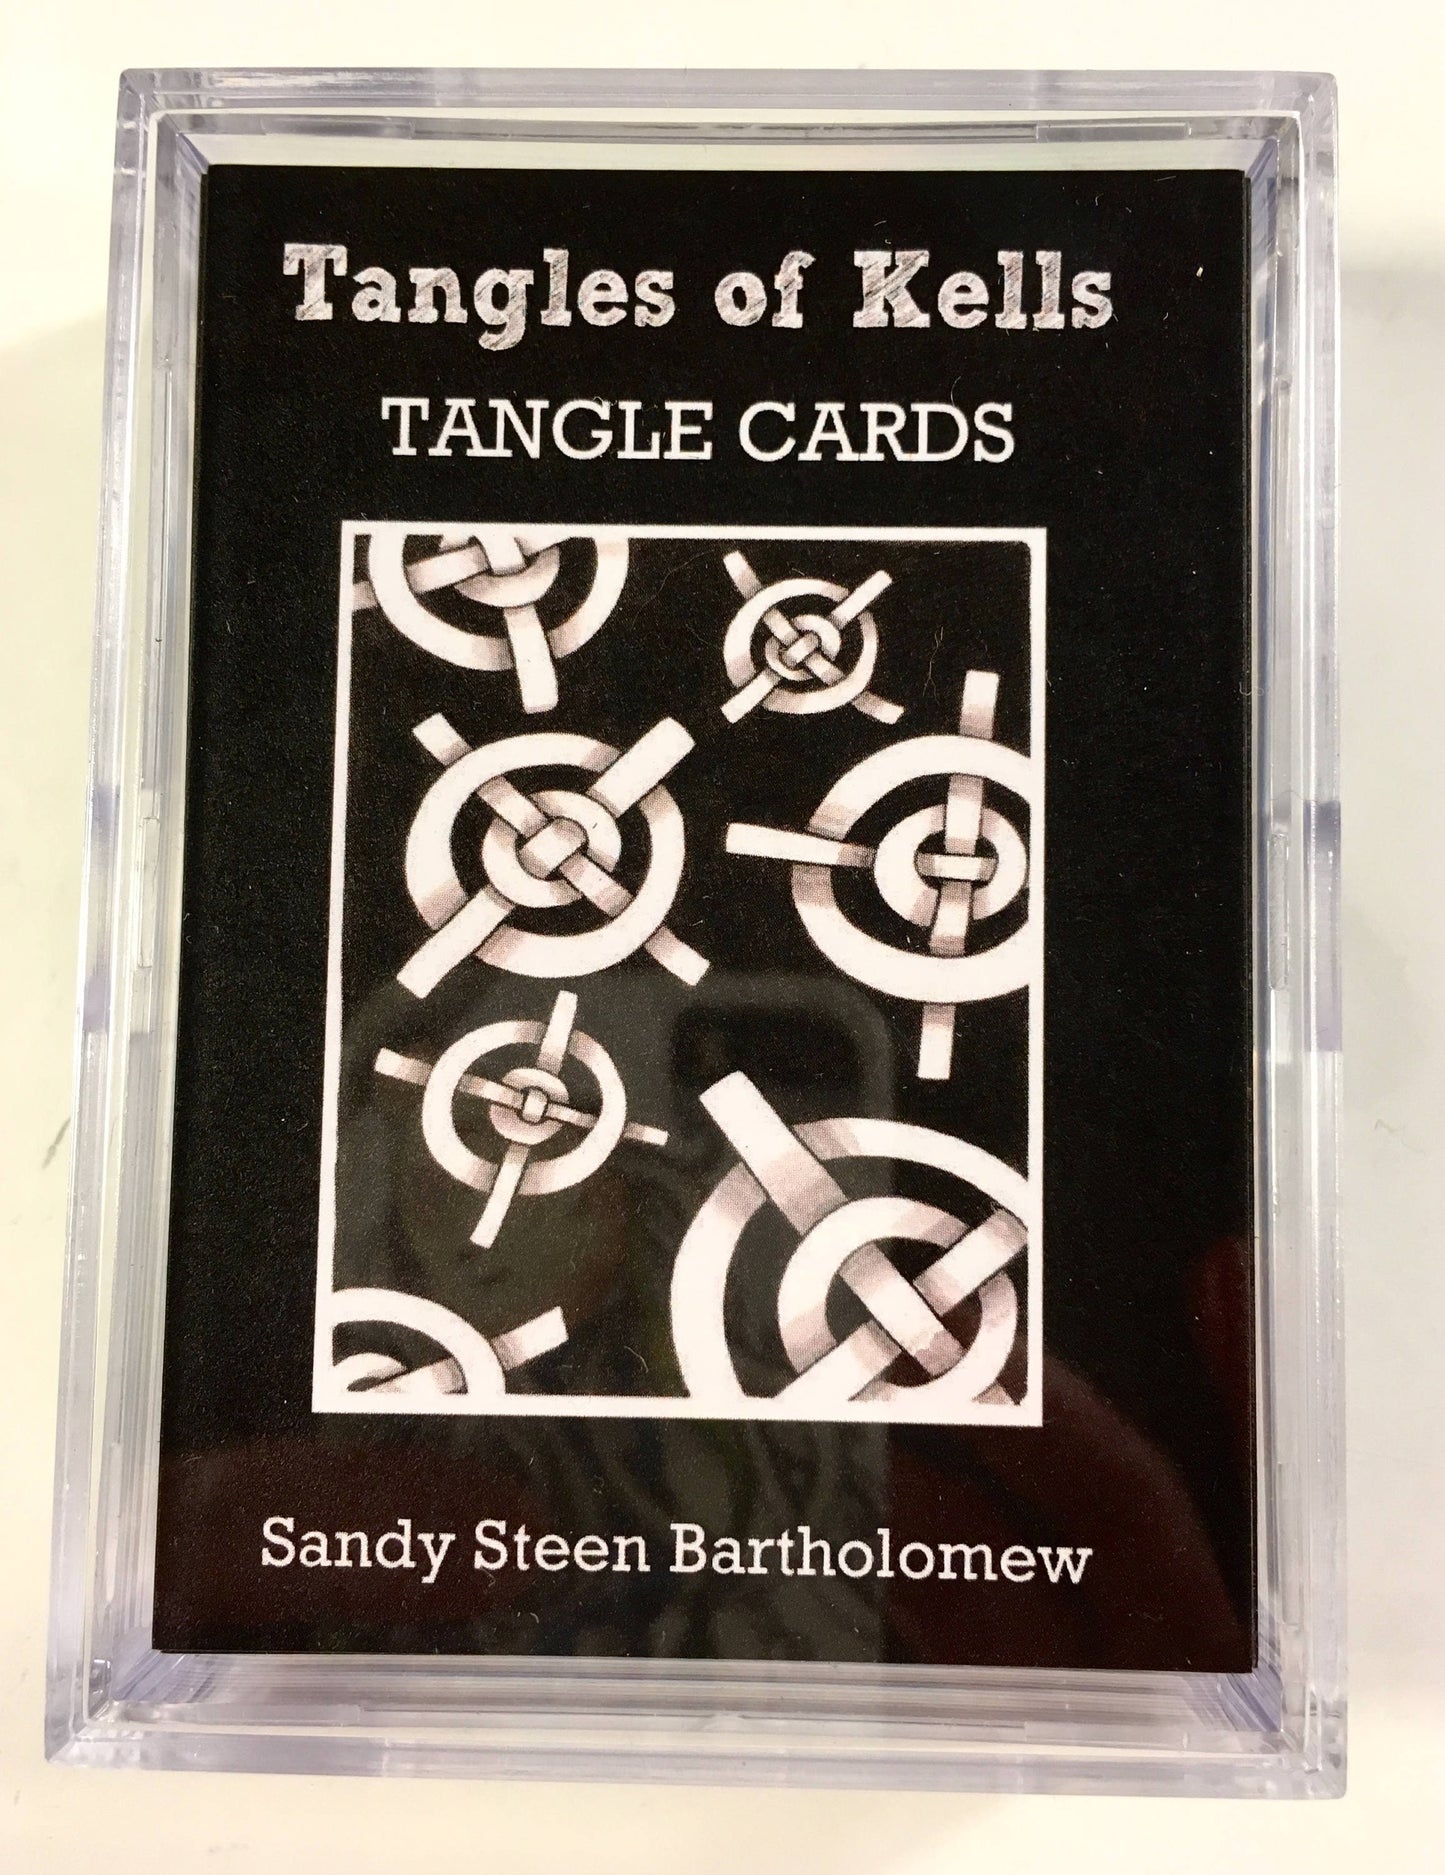 Tangle Cards - Tangles of Kells - card pack